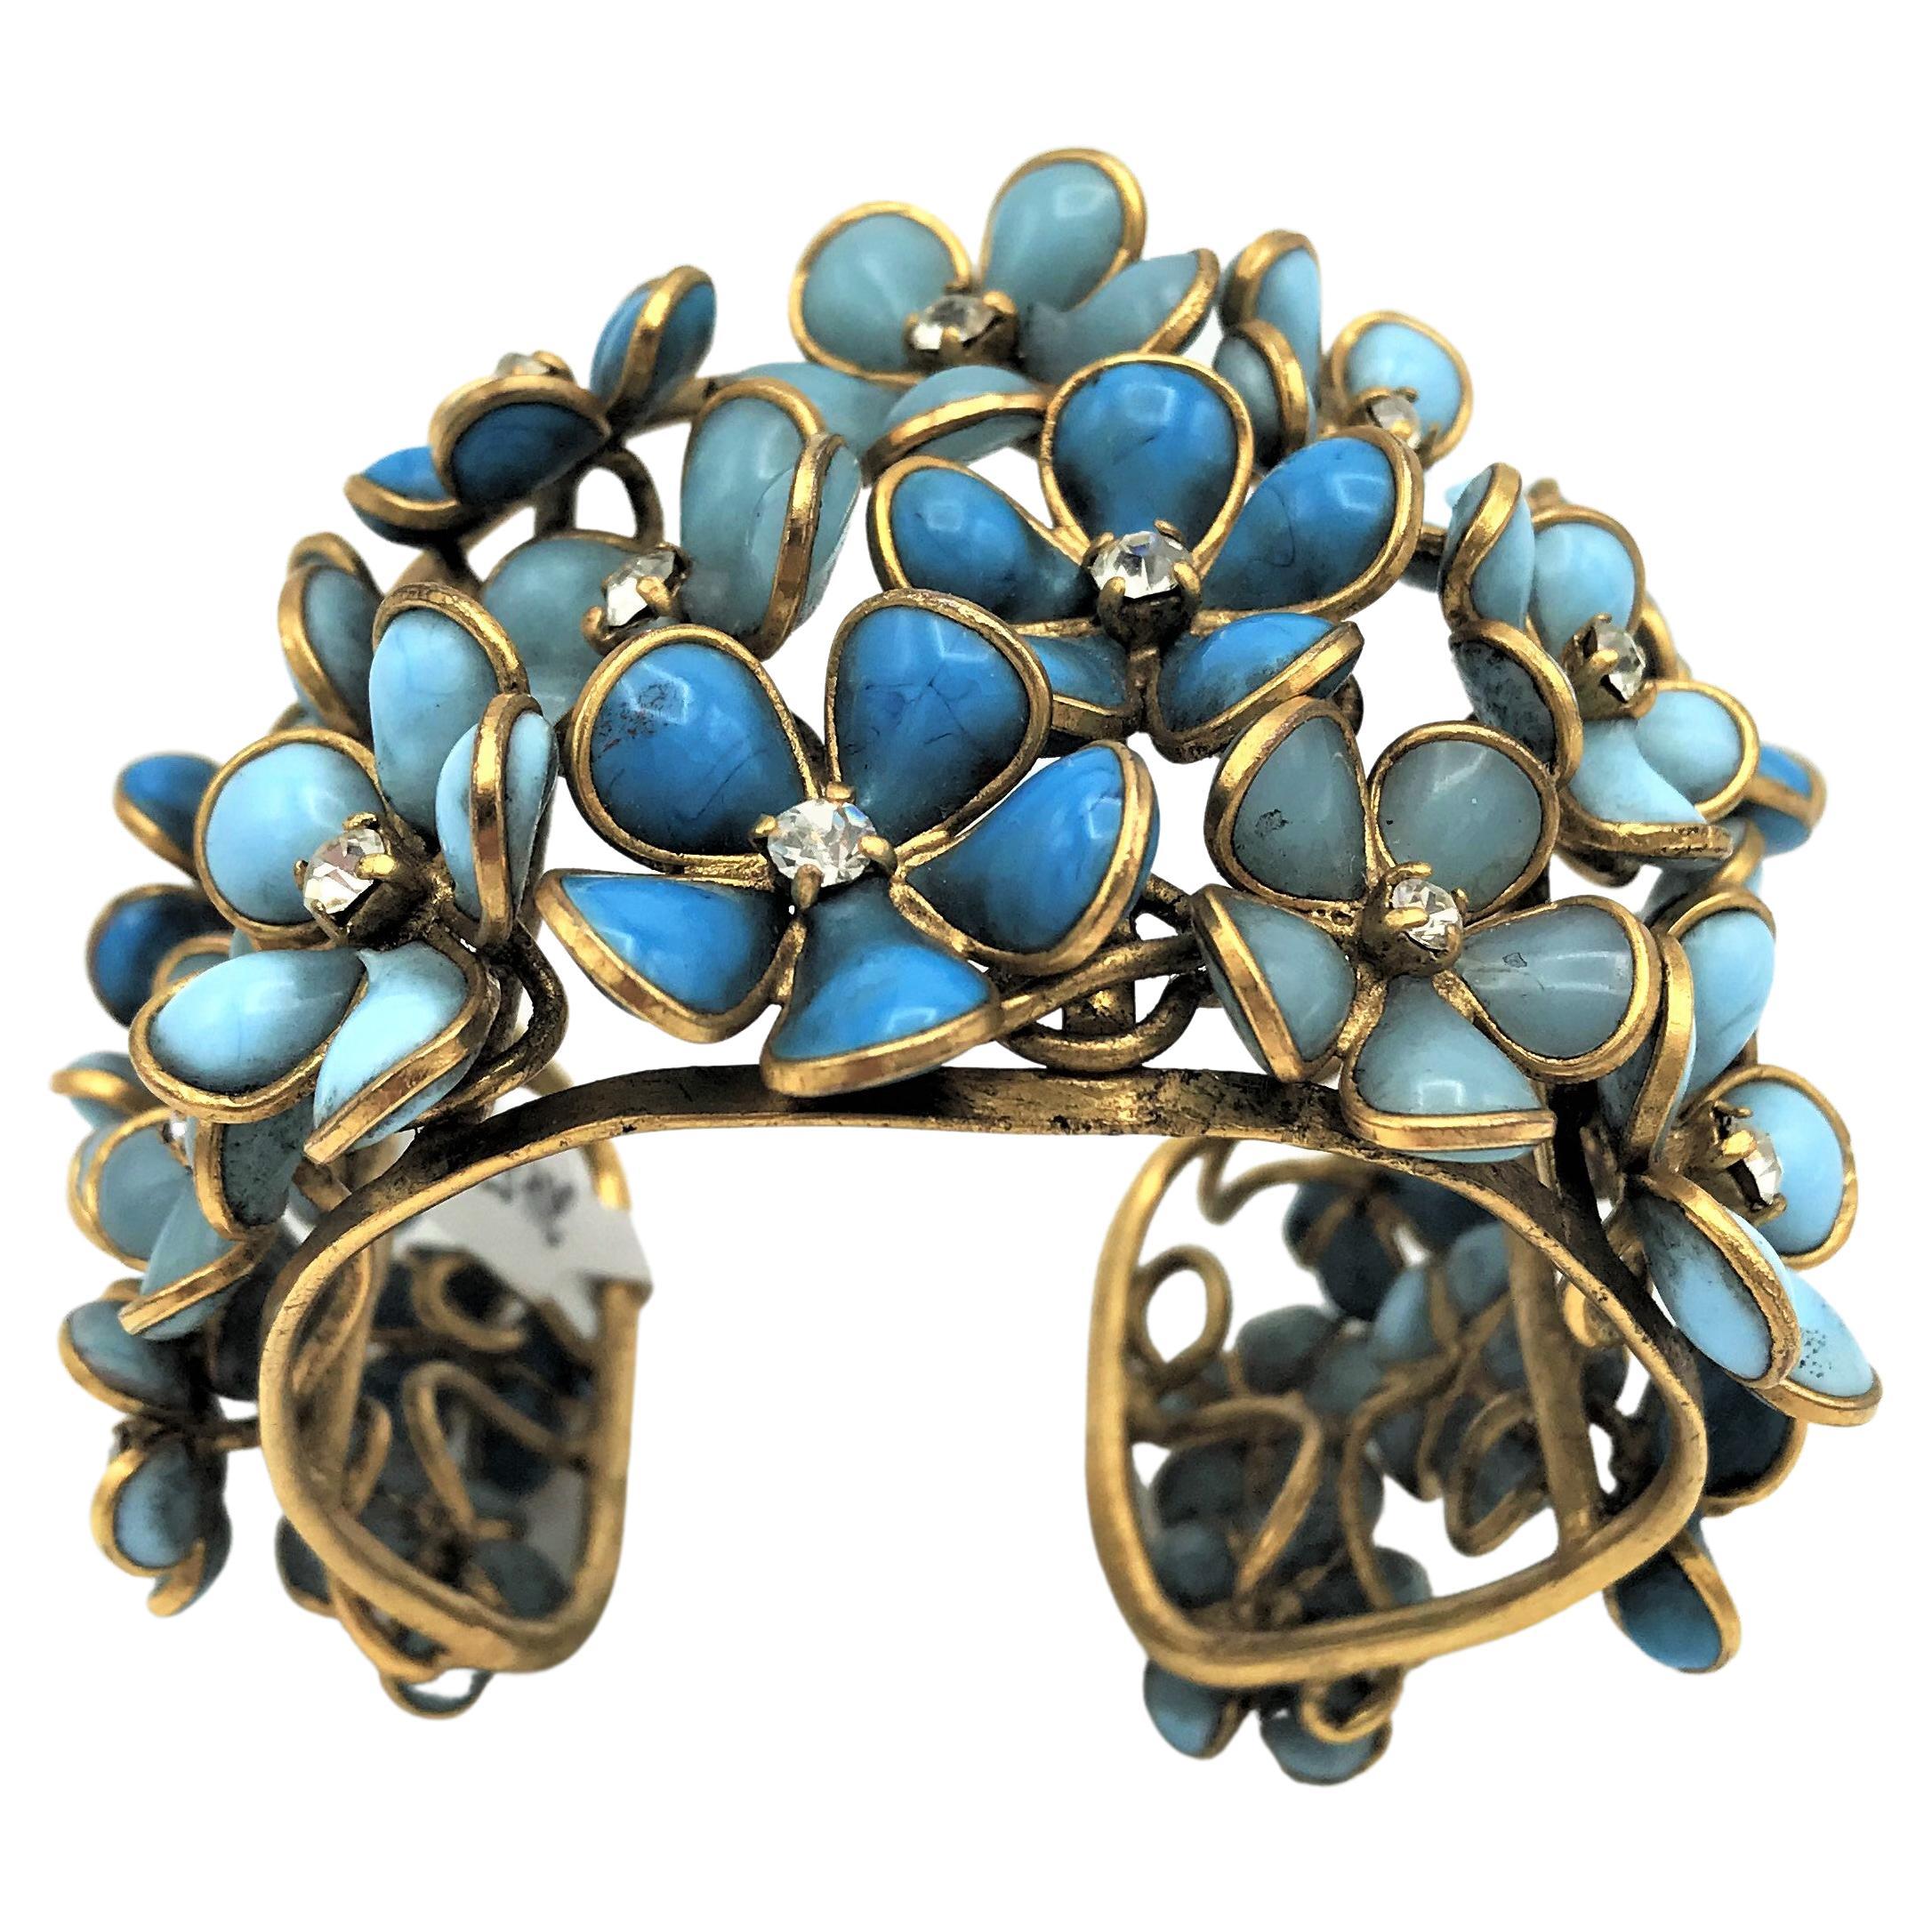 Flower open bracelet with many Gripoix flowers and rhinestones, gold plated 